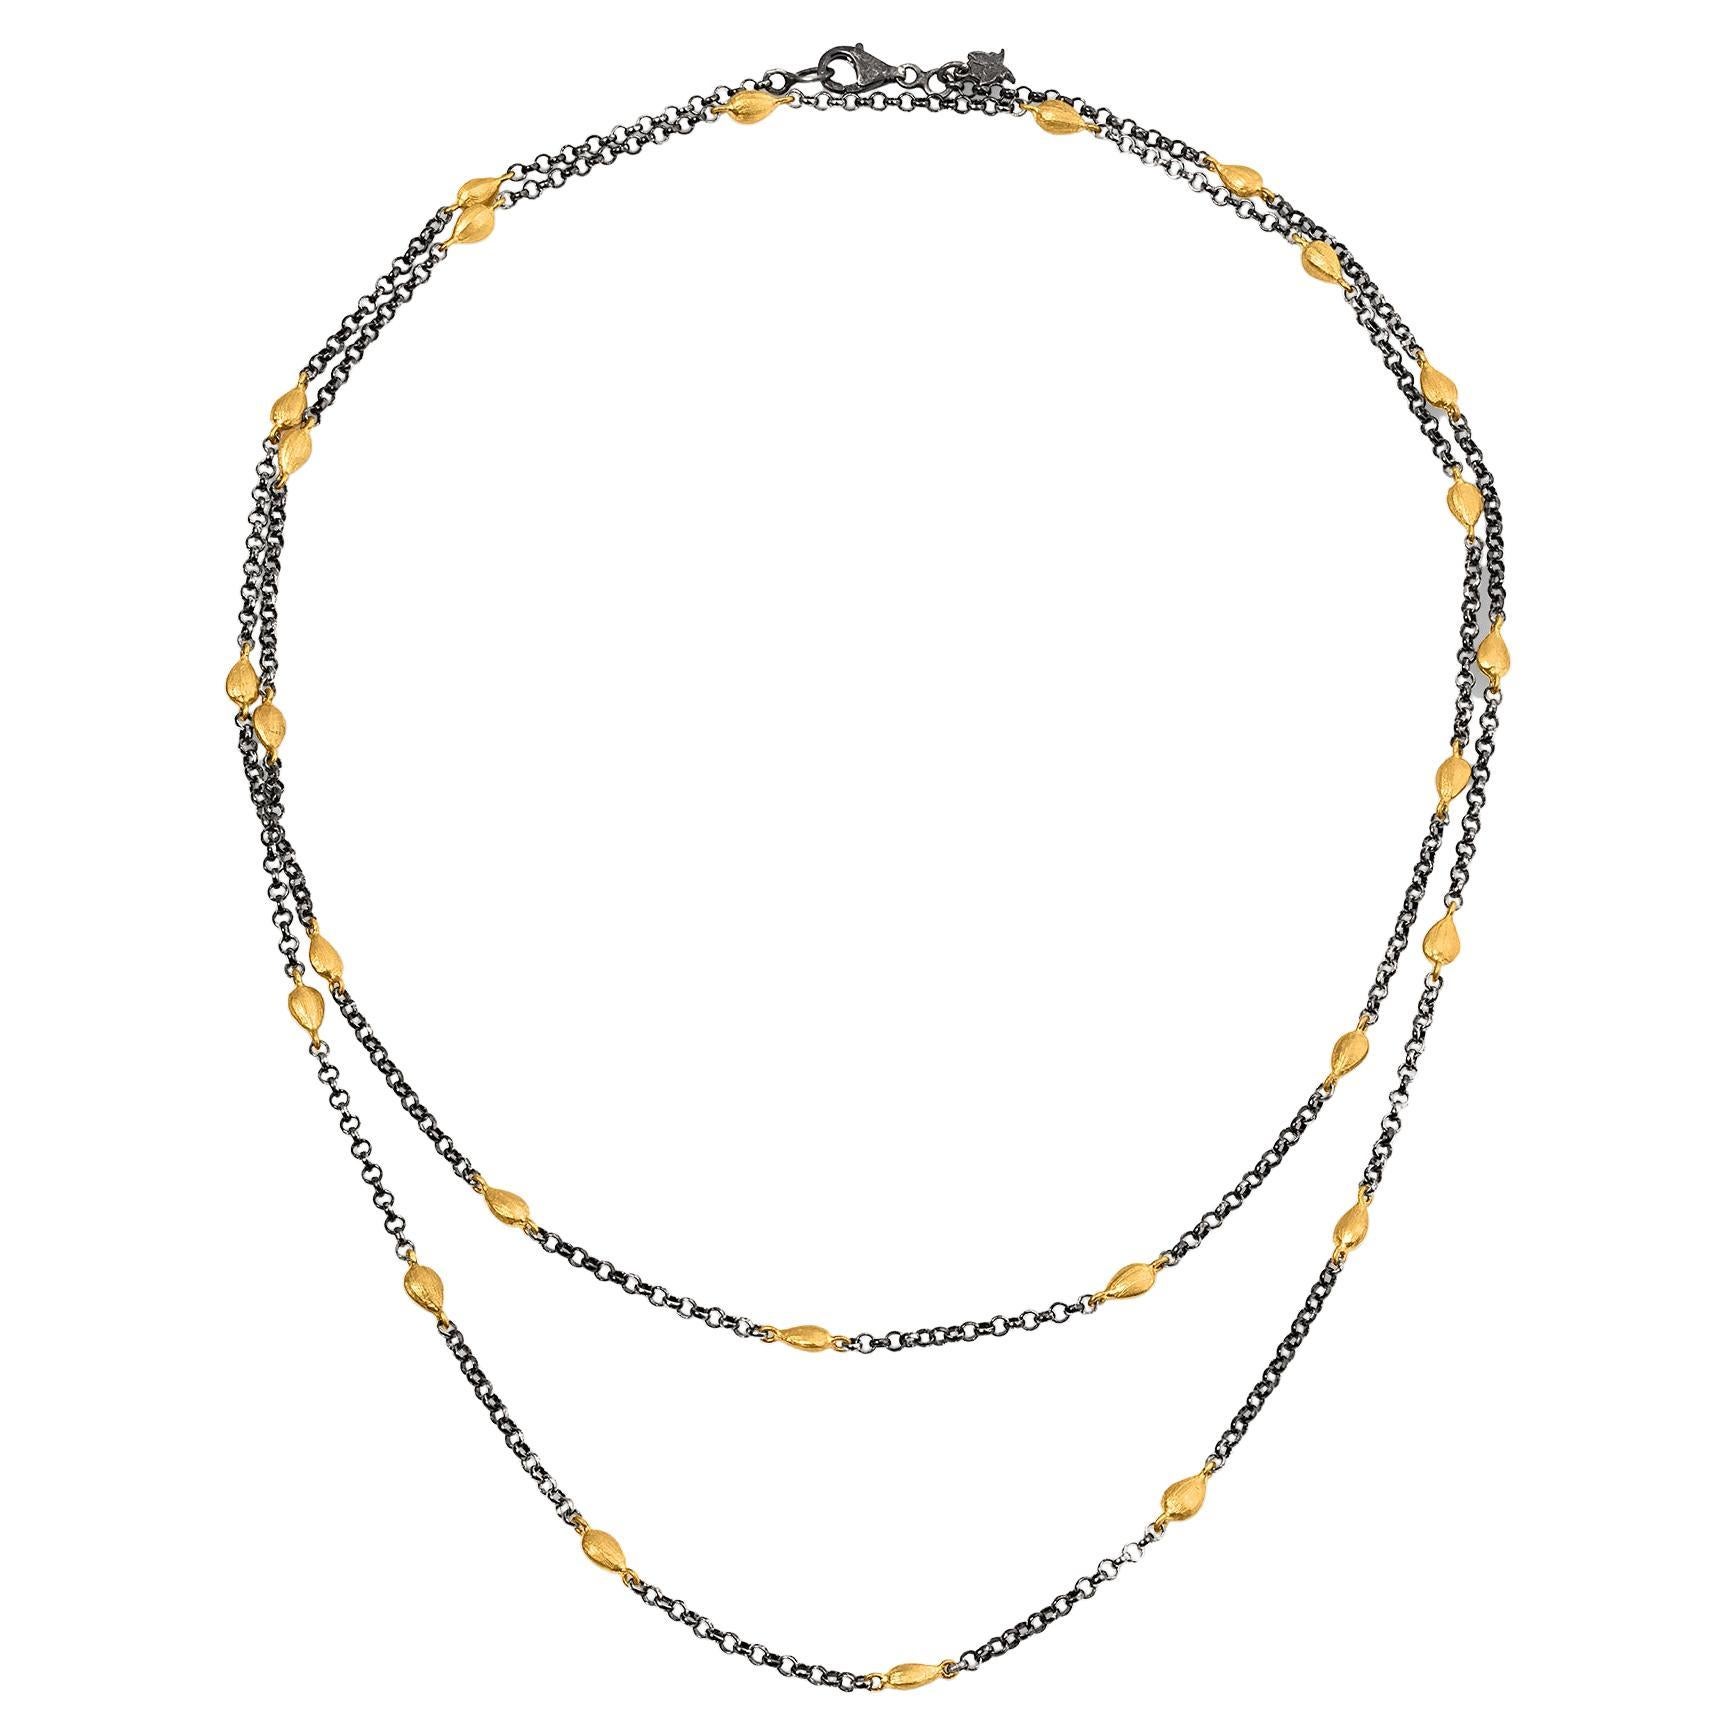 Silver Chain with 24K Beads by Kurtulan of Istanbul, Turkey, 35" For Sale